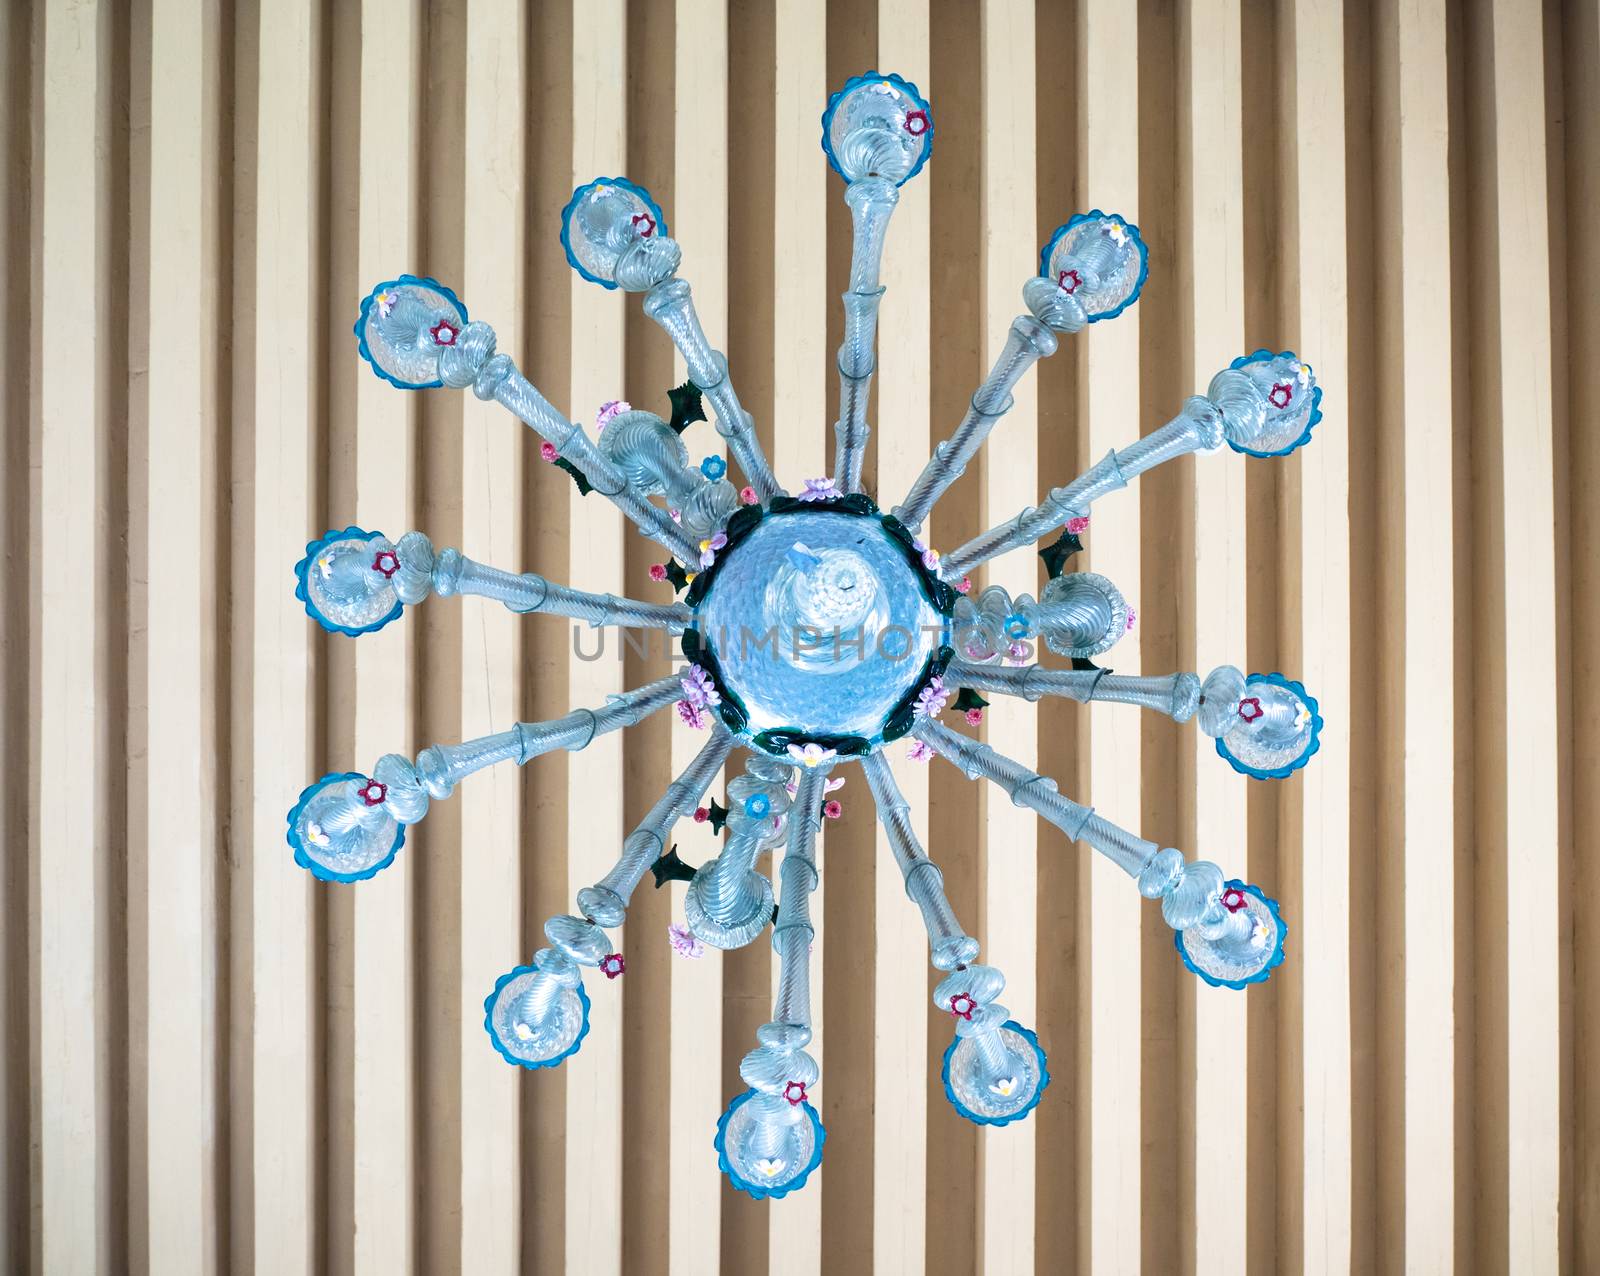 Antique chandelier of blown glass, handmade by master glassblowers of Burano, Italy.